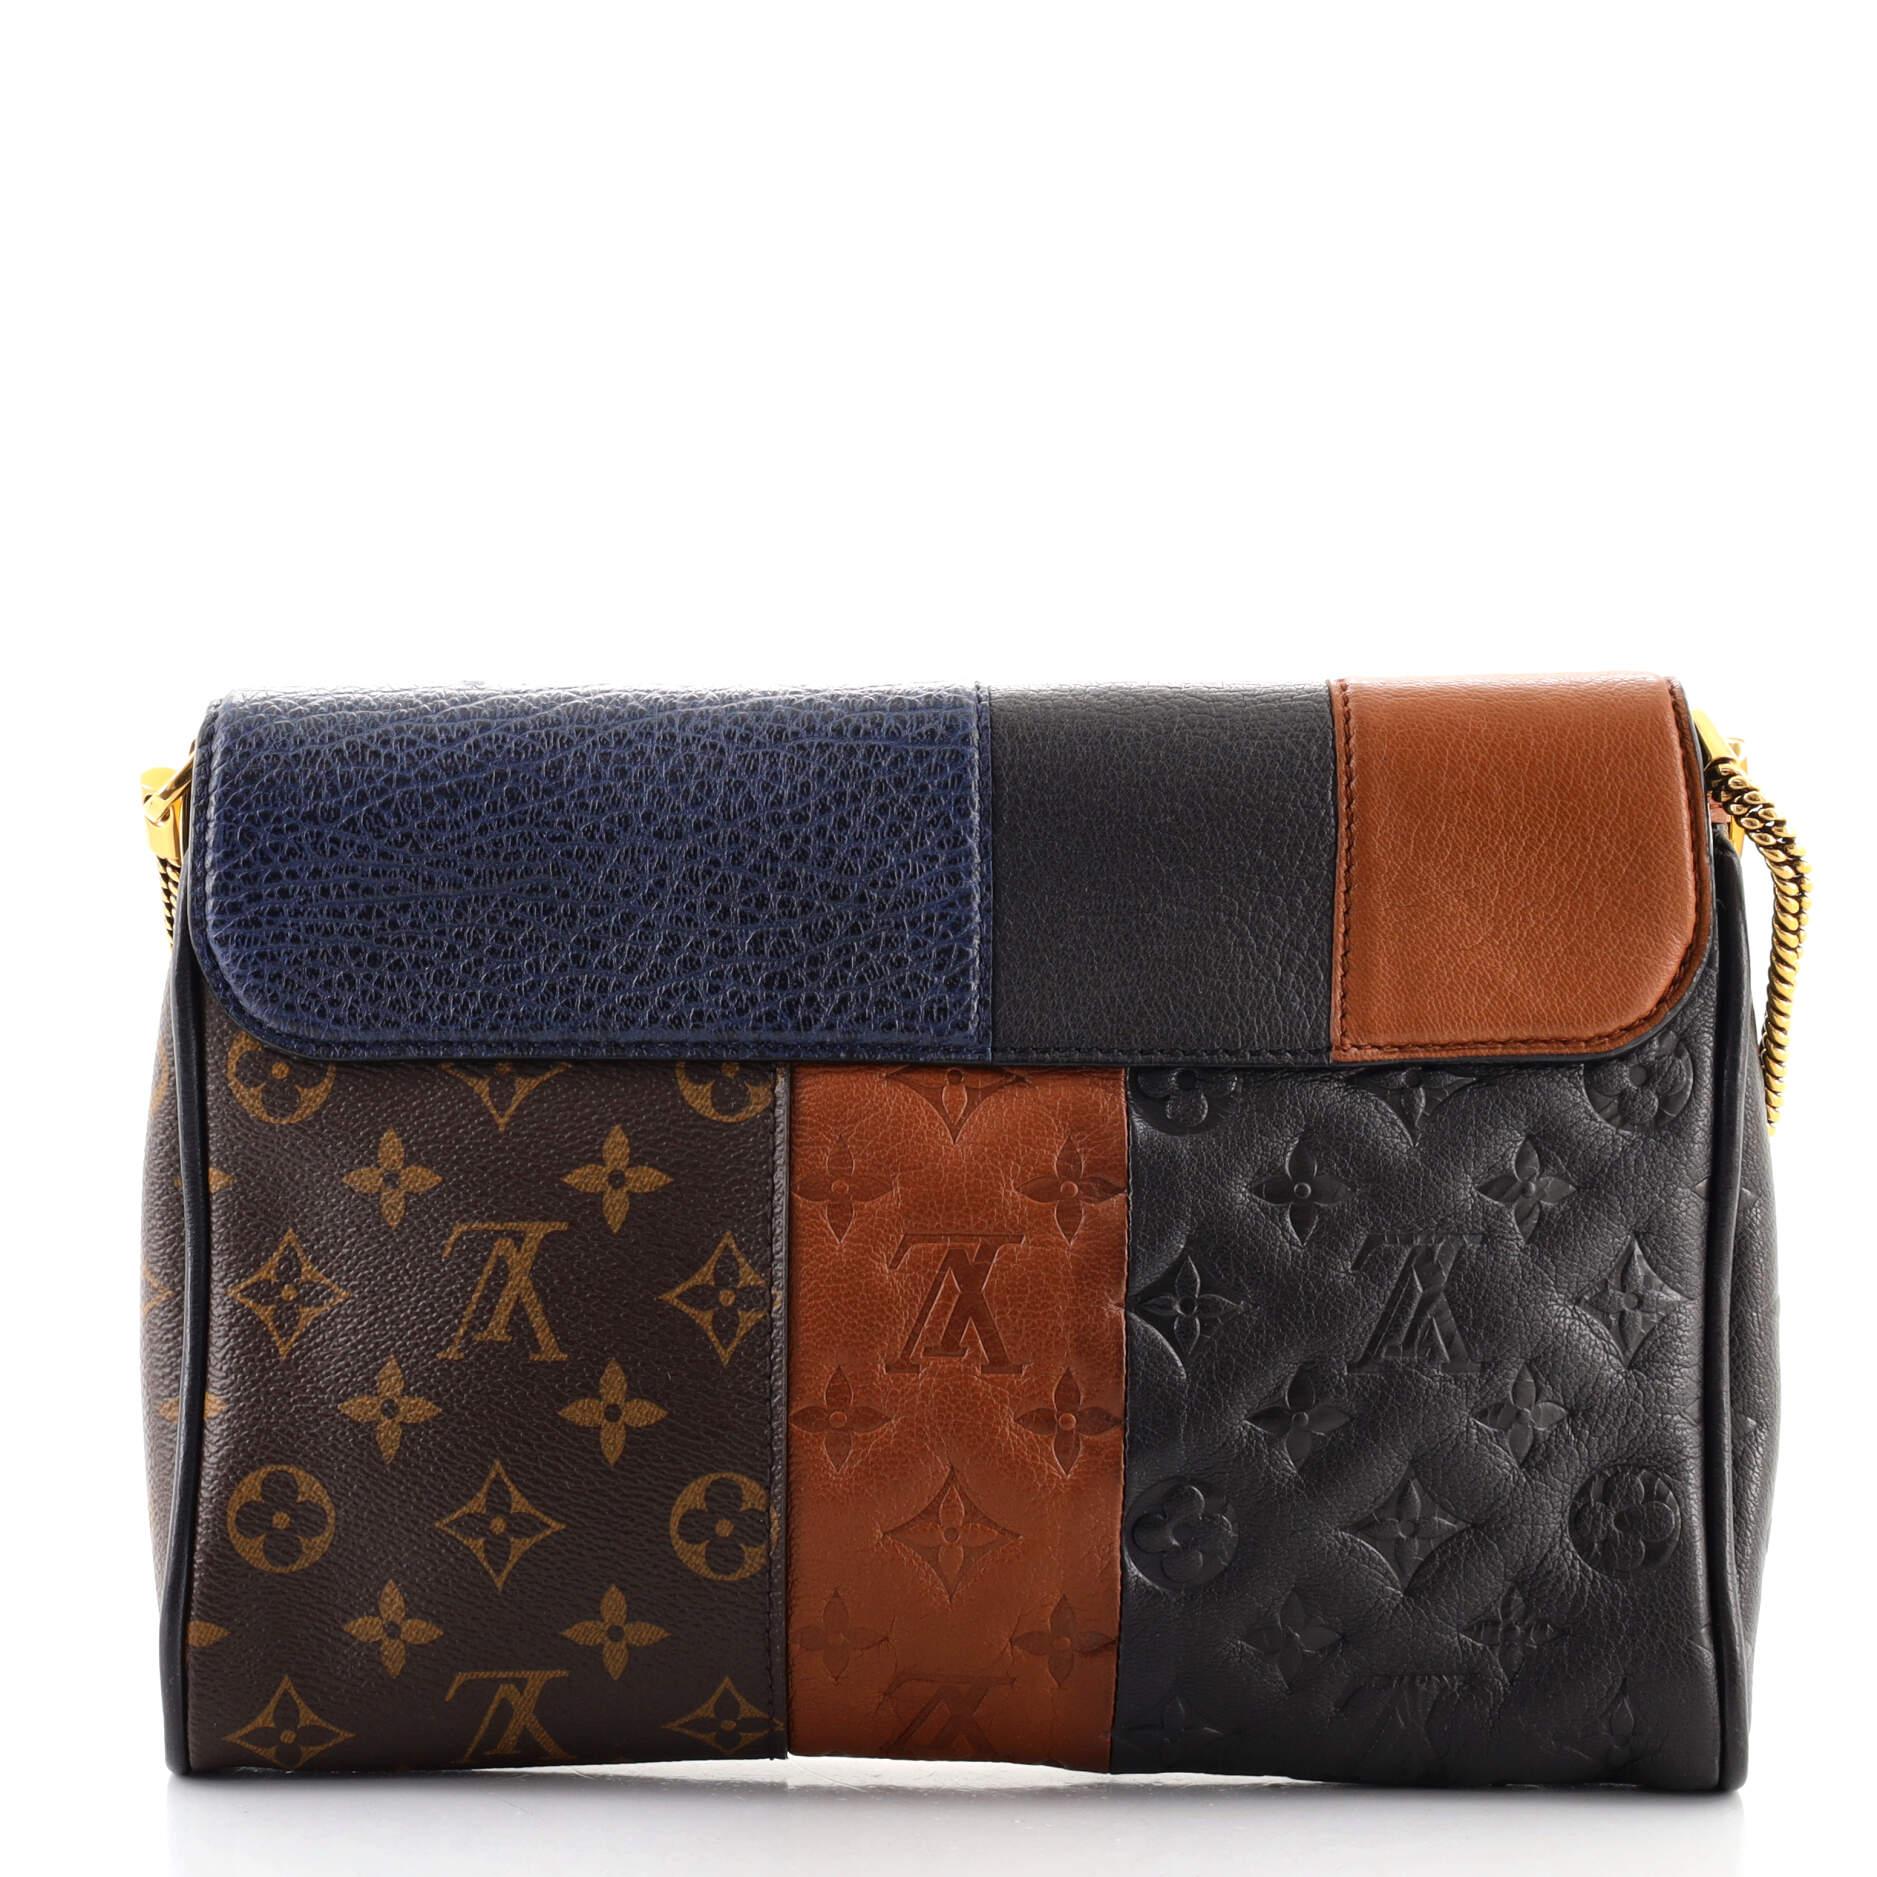 louis vuitton purse with gold plate